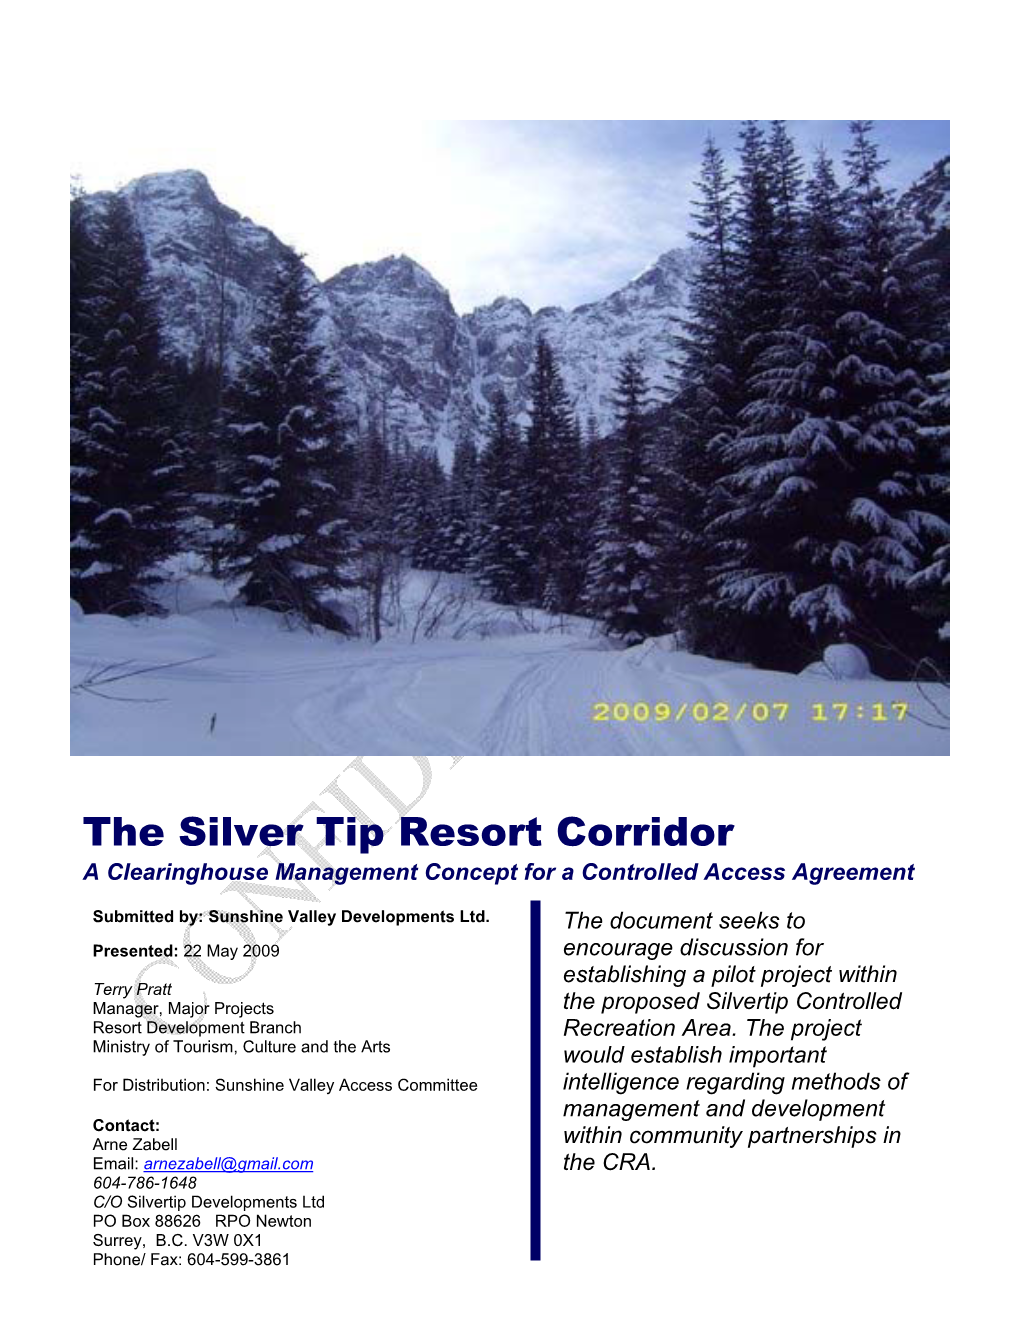 The Silvertip Resort Corridor Forest Service Road Network and the Method by Which the Proposes Controlled Recreation Area (CRA )Could Be Managed